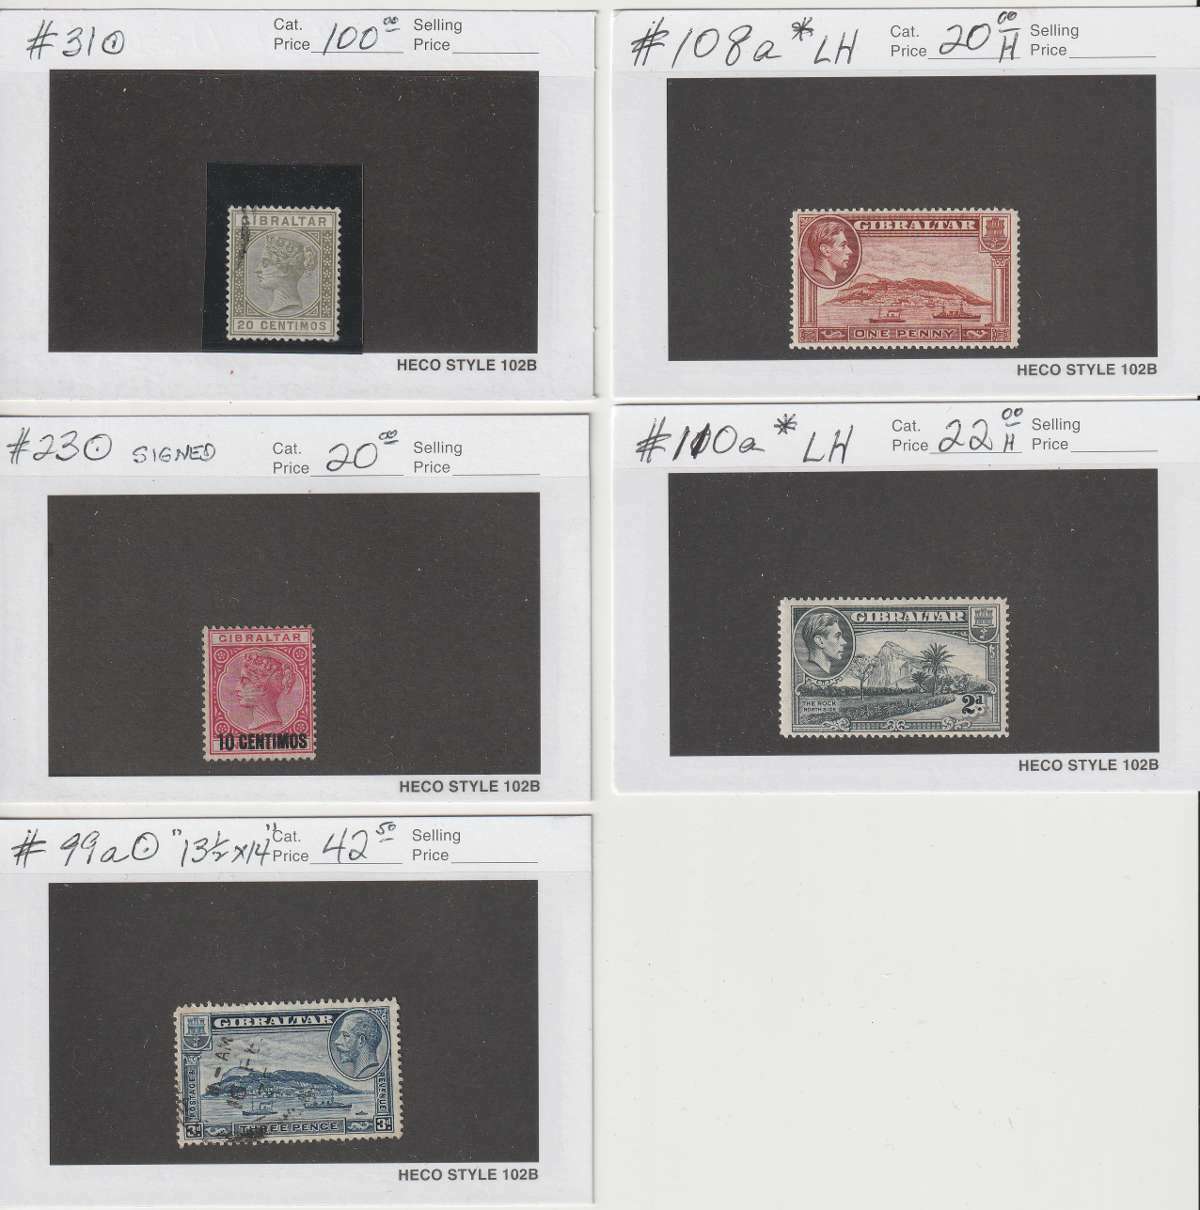 D3696: Pre WW II Inventory cleanup selling sale Gibraltar 67% OFF of fixed price Stamp CV Lot; $285